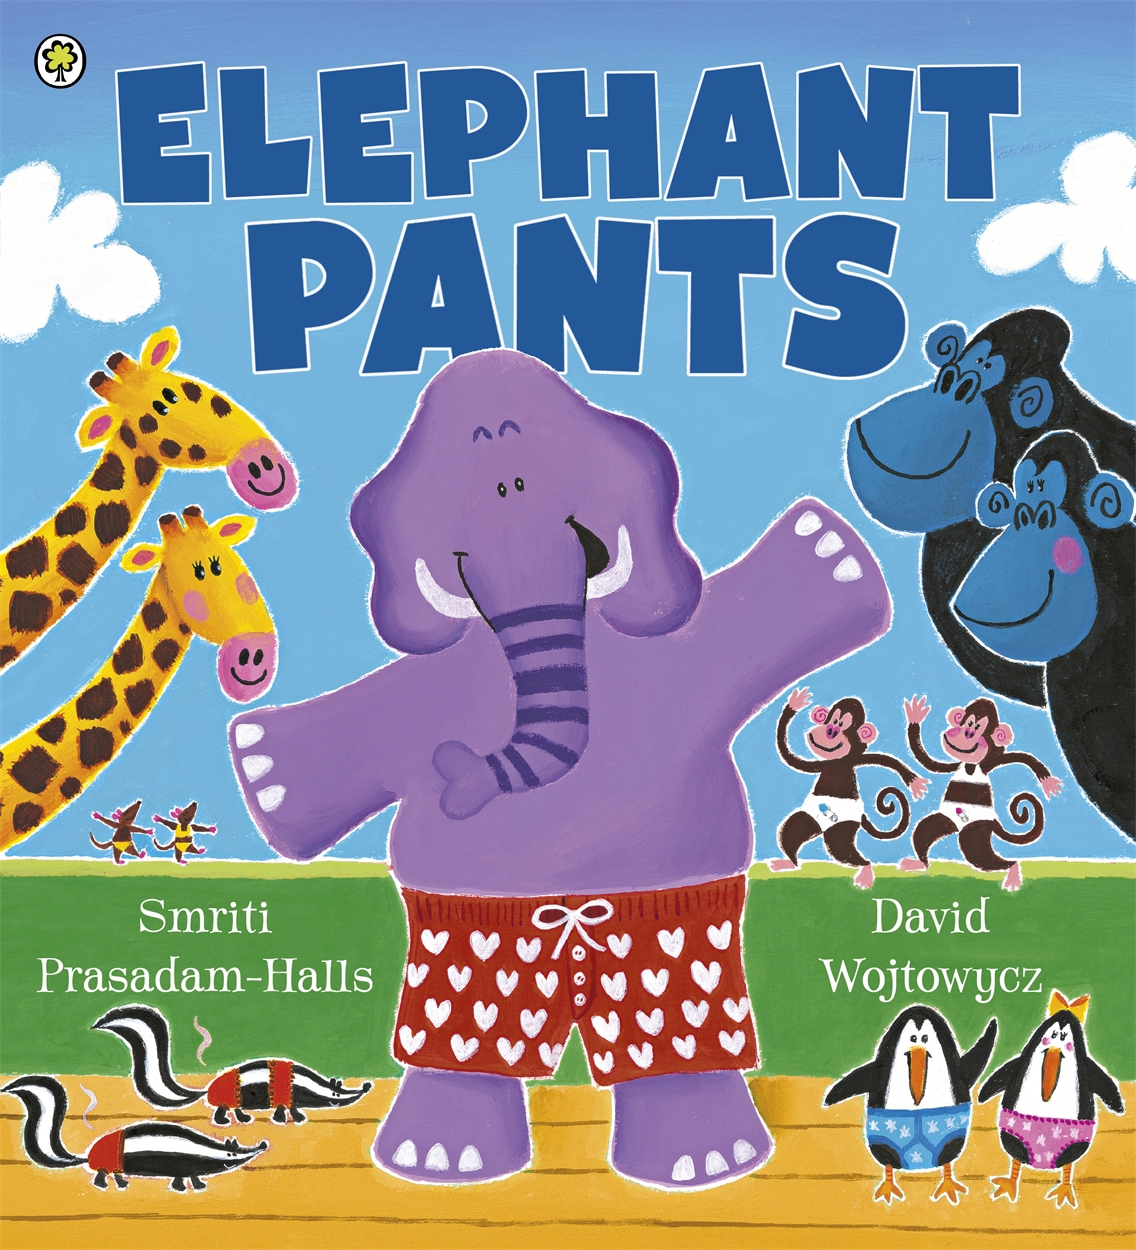 The puzzling discussions about the 'elephant pants